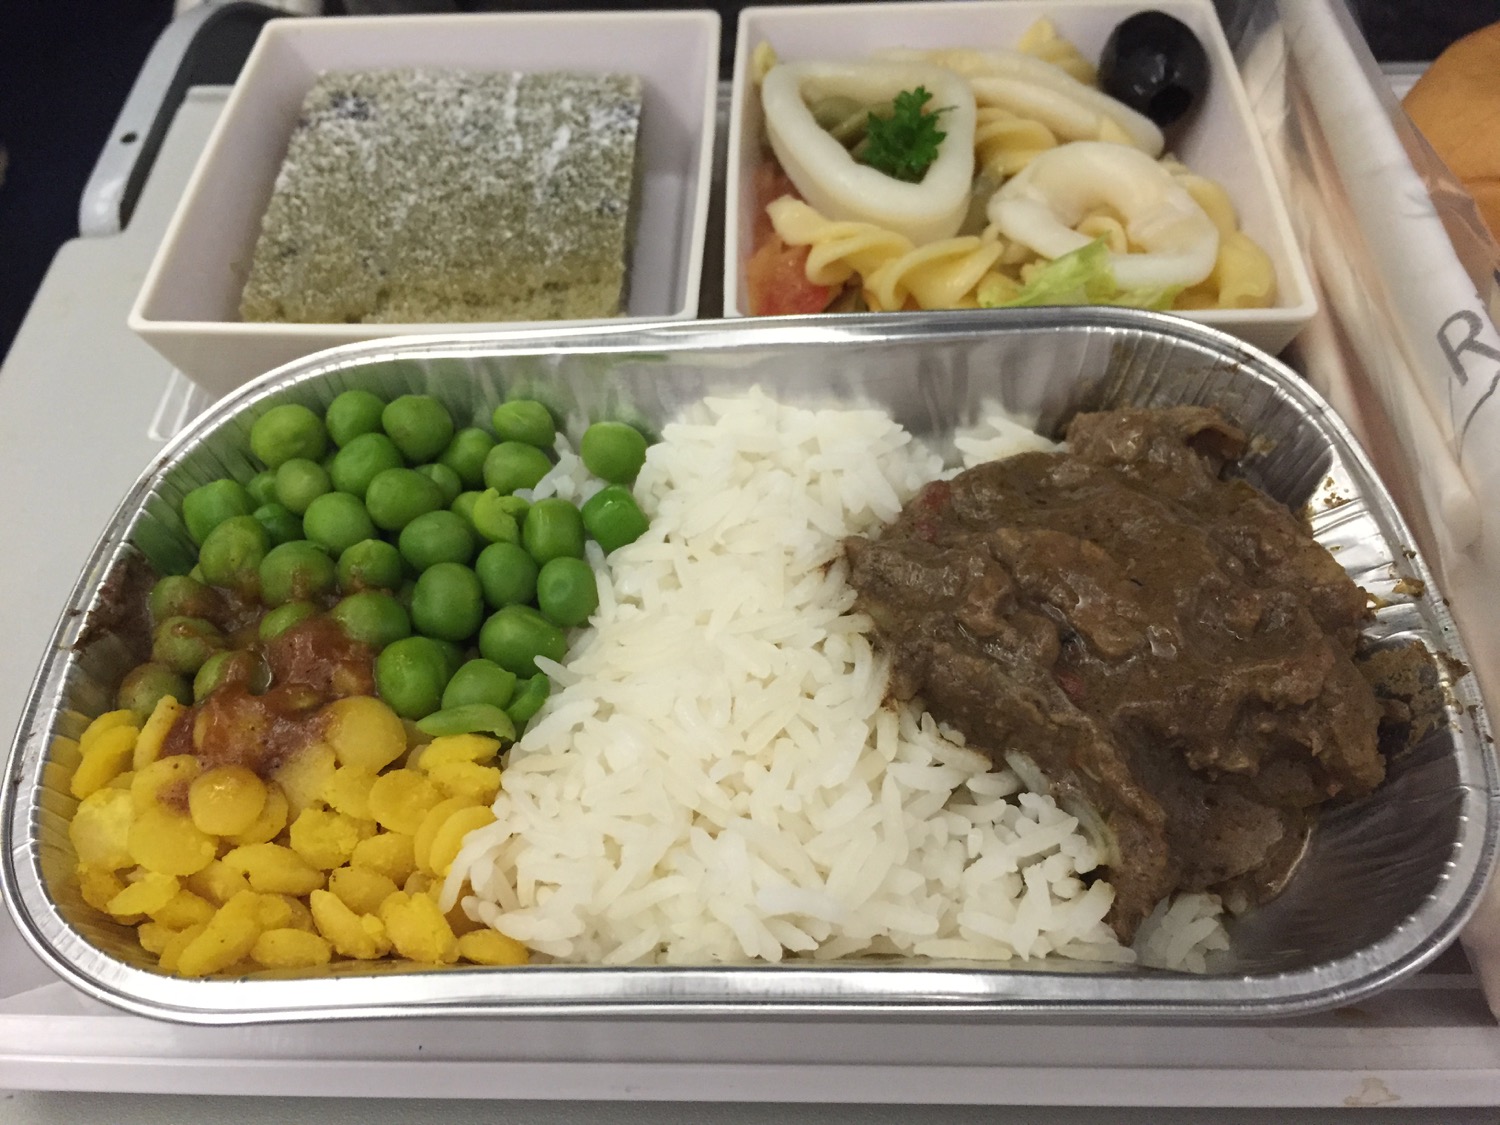 Royal Brunei Economy Class Meal - 3